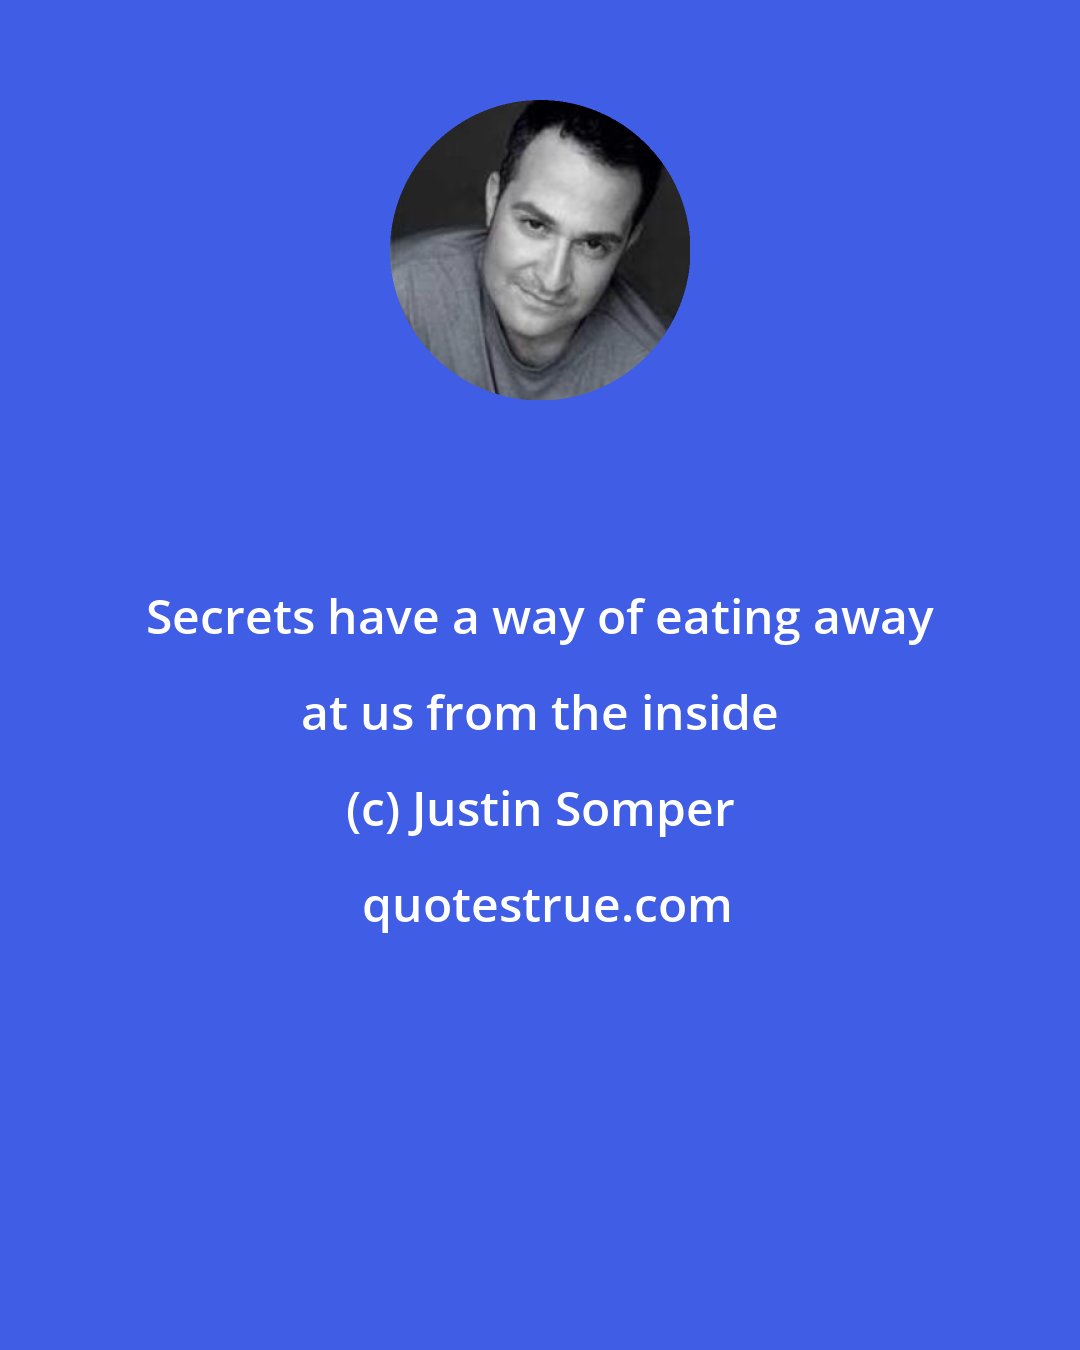 Justin Somper: Secrets have a way of eating away at us from the inside